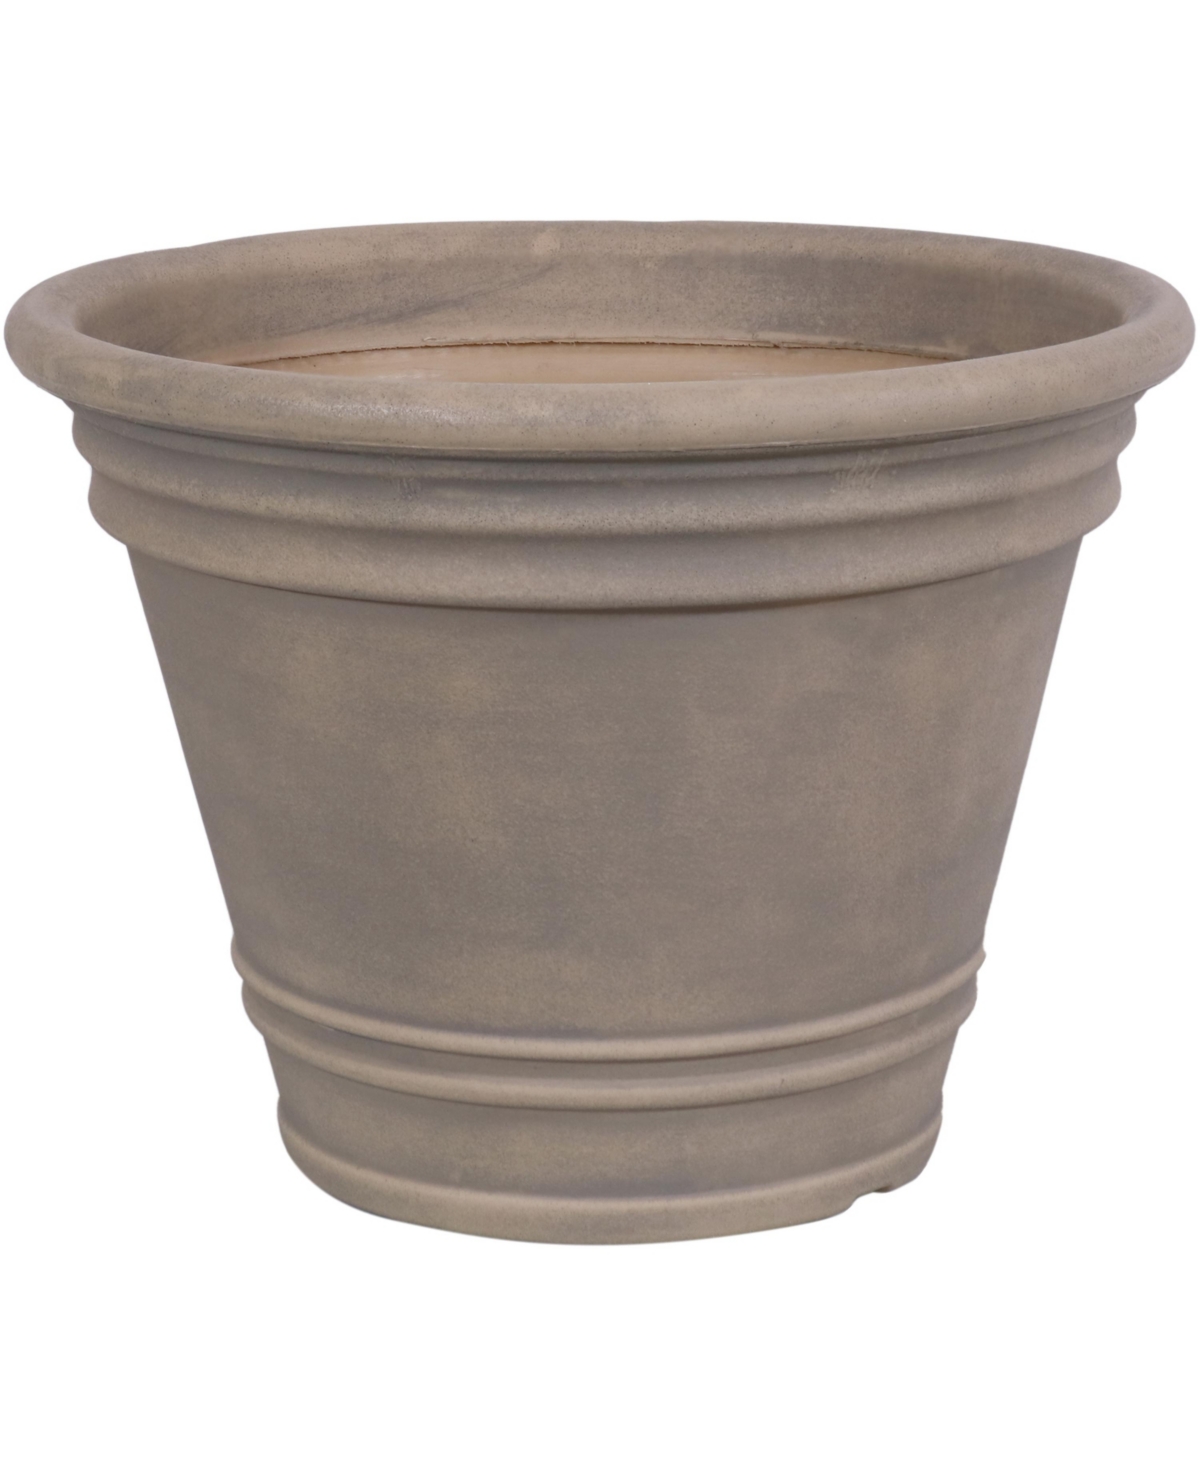 20 in Franklin Polyresin Planter with Uv-Resistant Finish - Beige - Beige